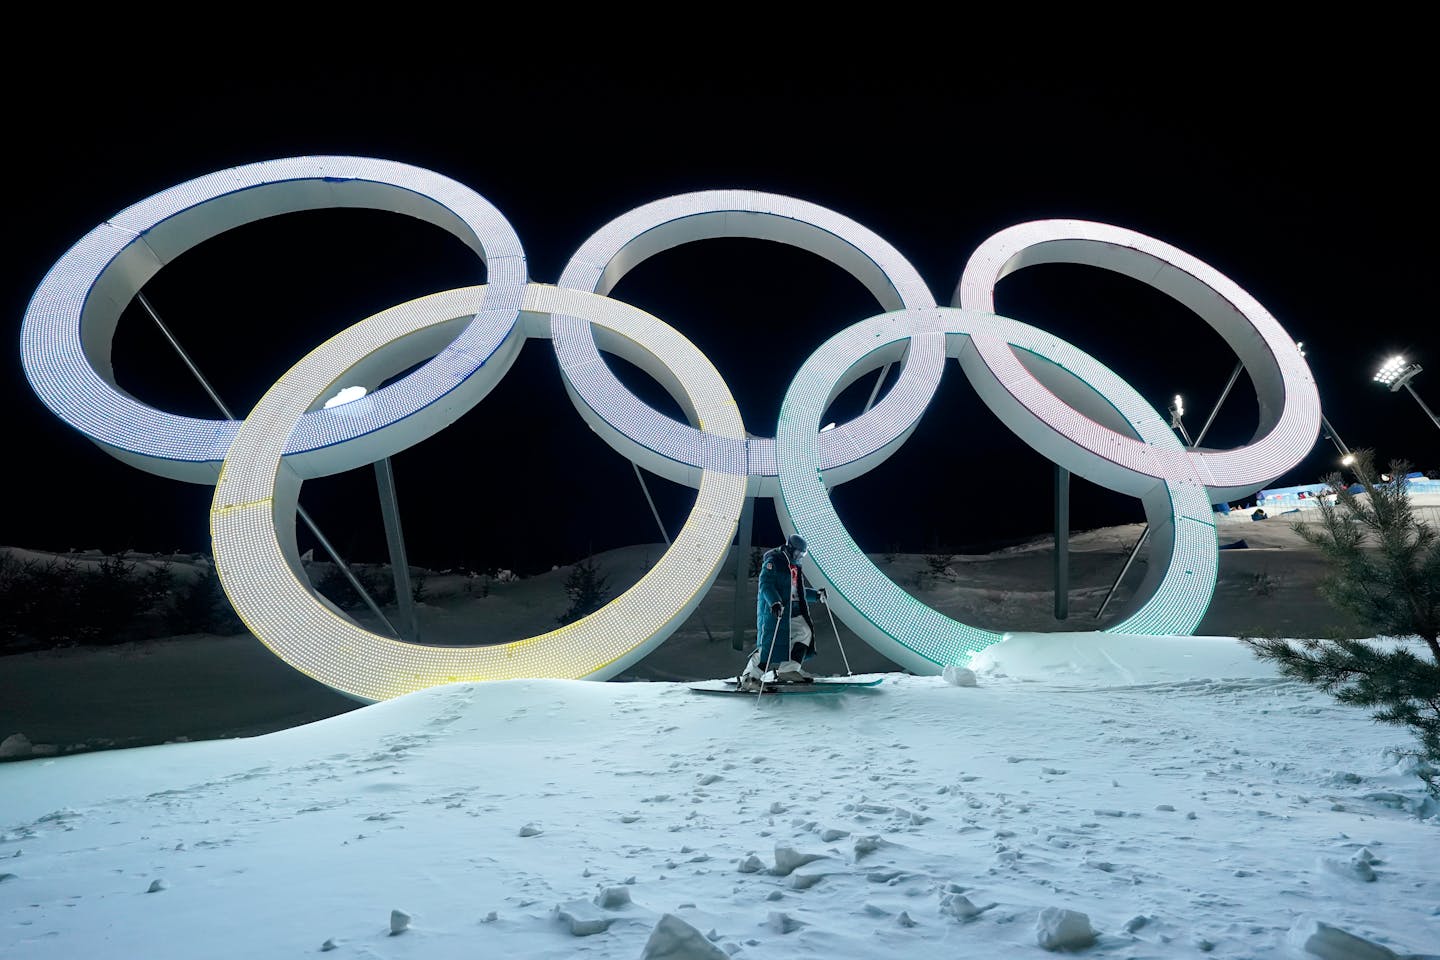 June 22. It is said that when sitting in the Whistler Olympic Rings, you  can feel the spirit of all the Olympians. | Daily pictures, Exotic pets,  Olympians